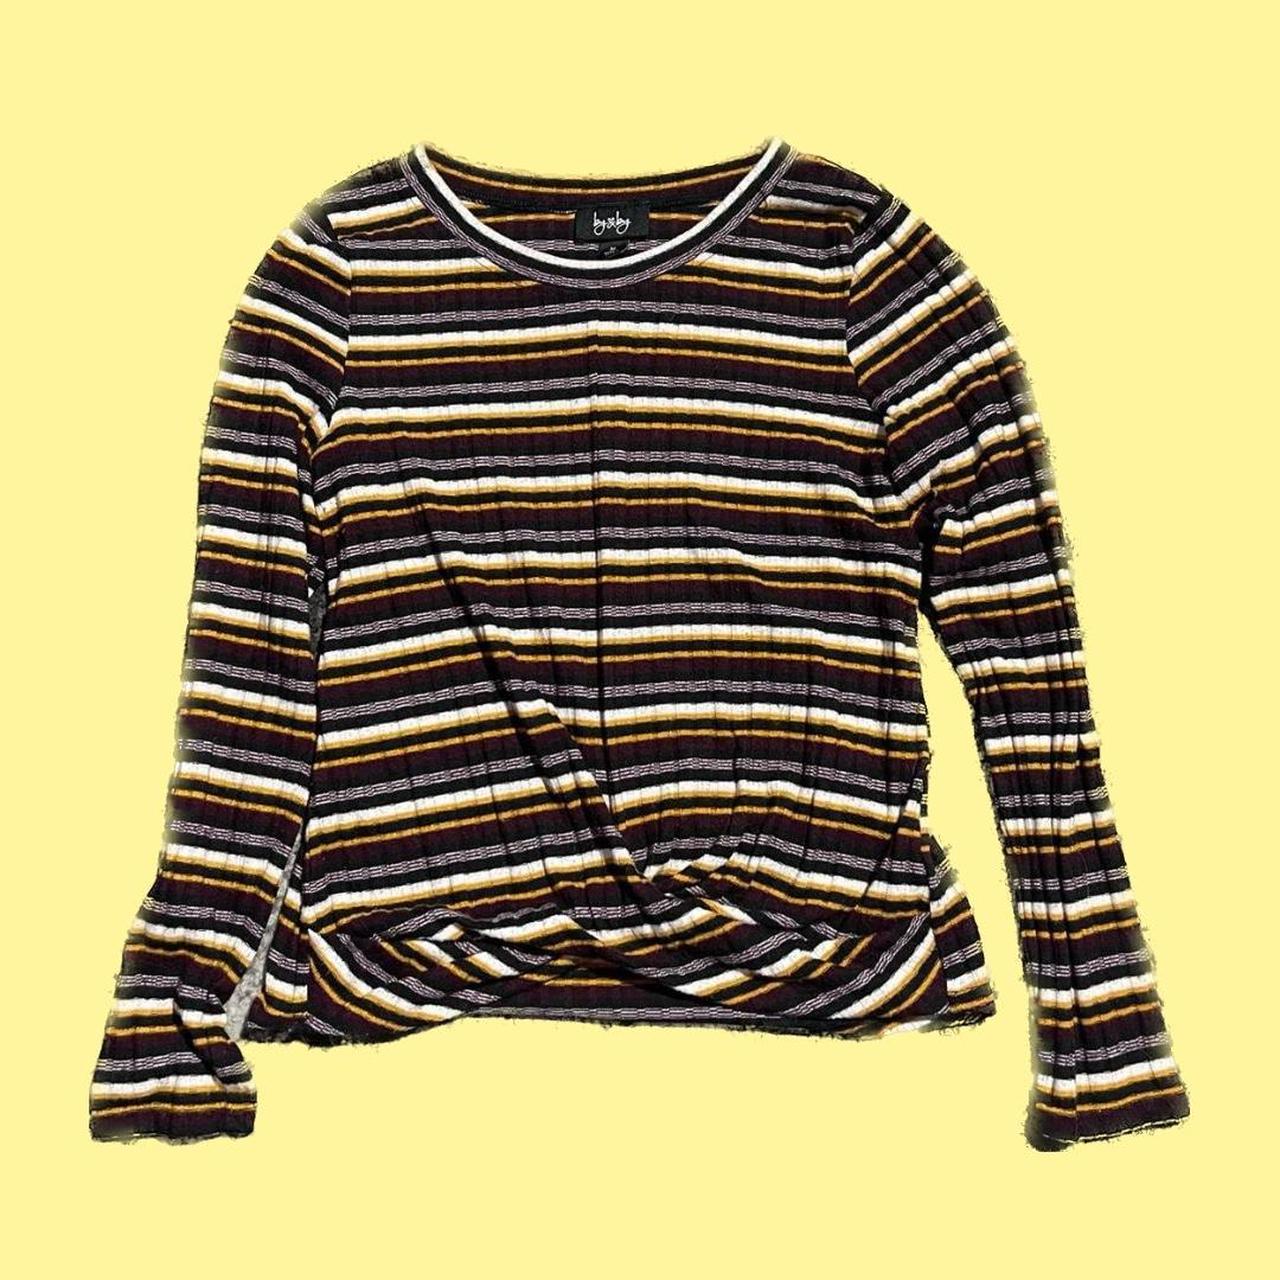 Product Image 1 - MULTI COLOR STRIPED SWEATER
BY BY